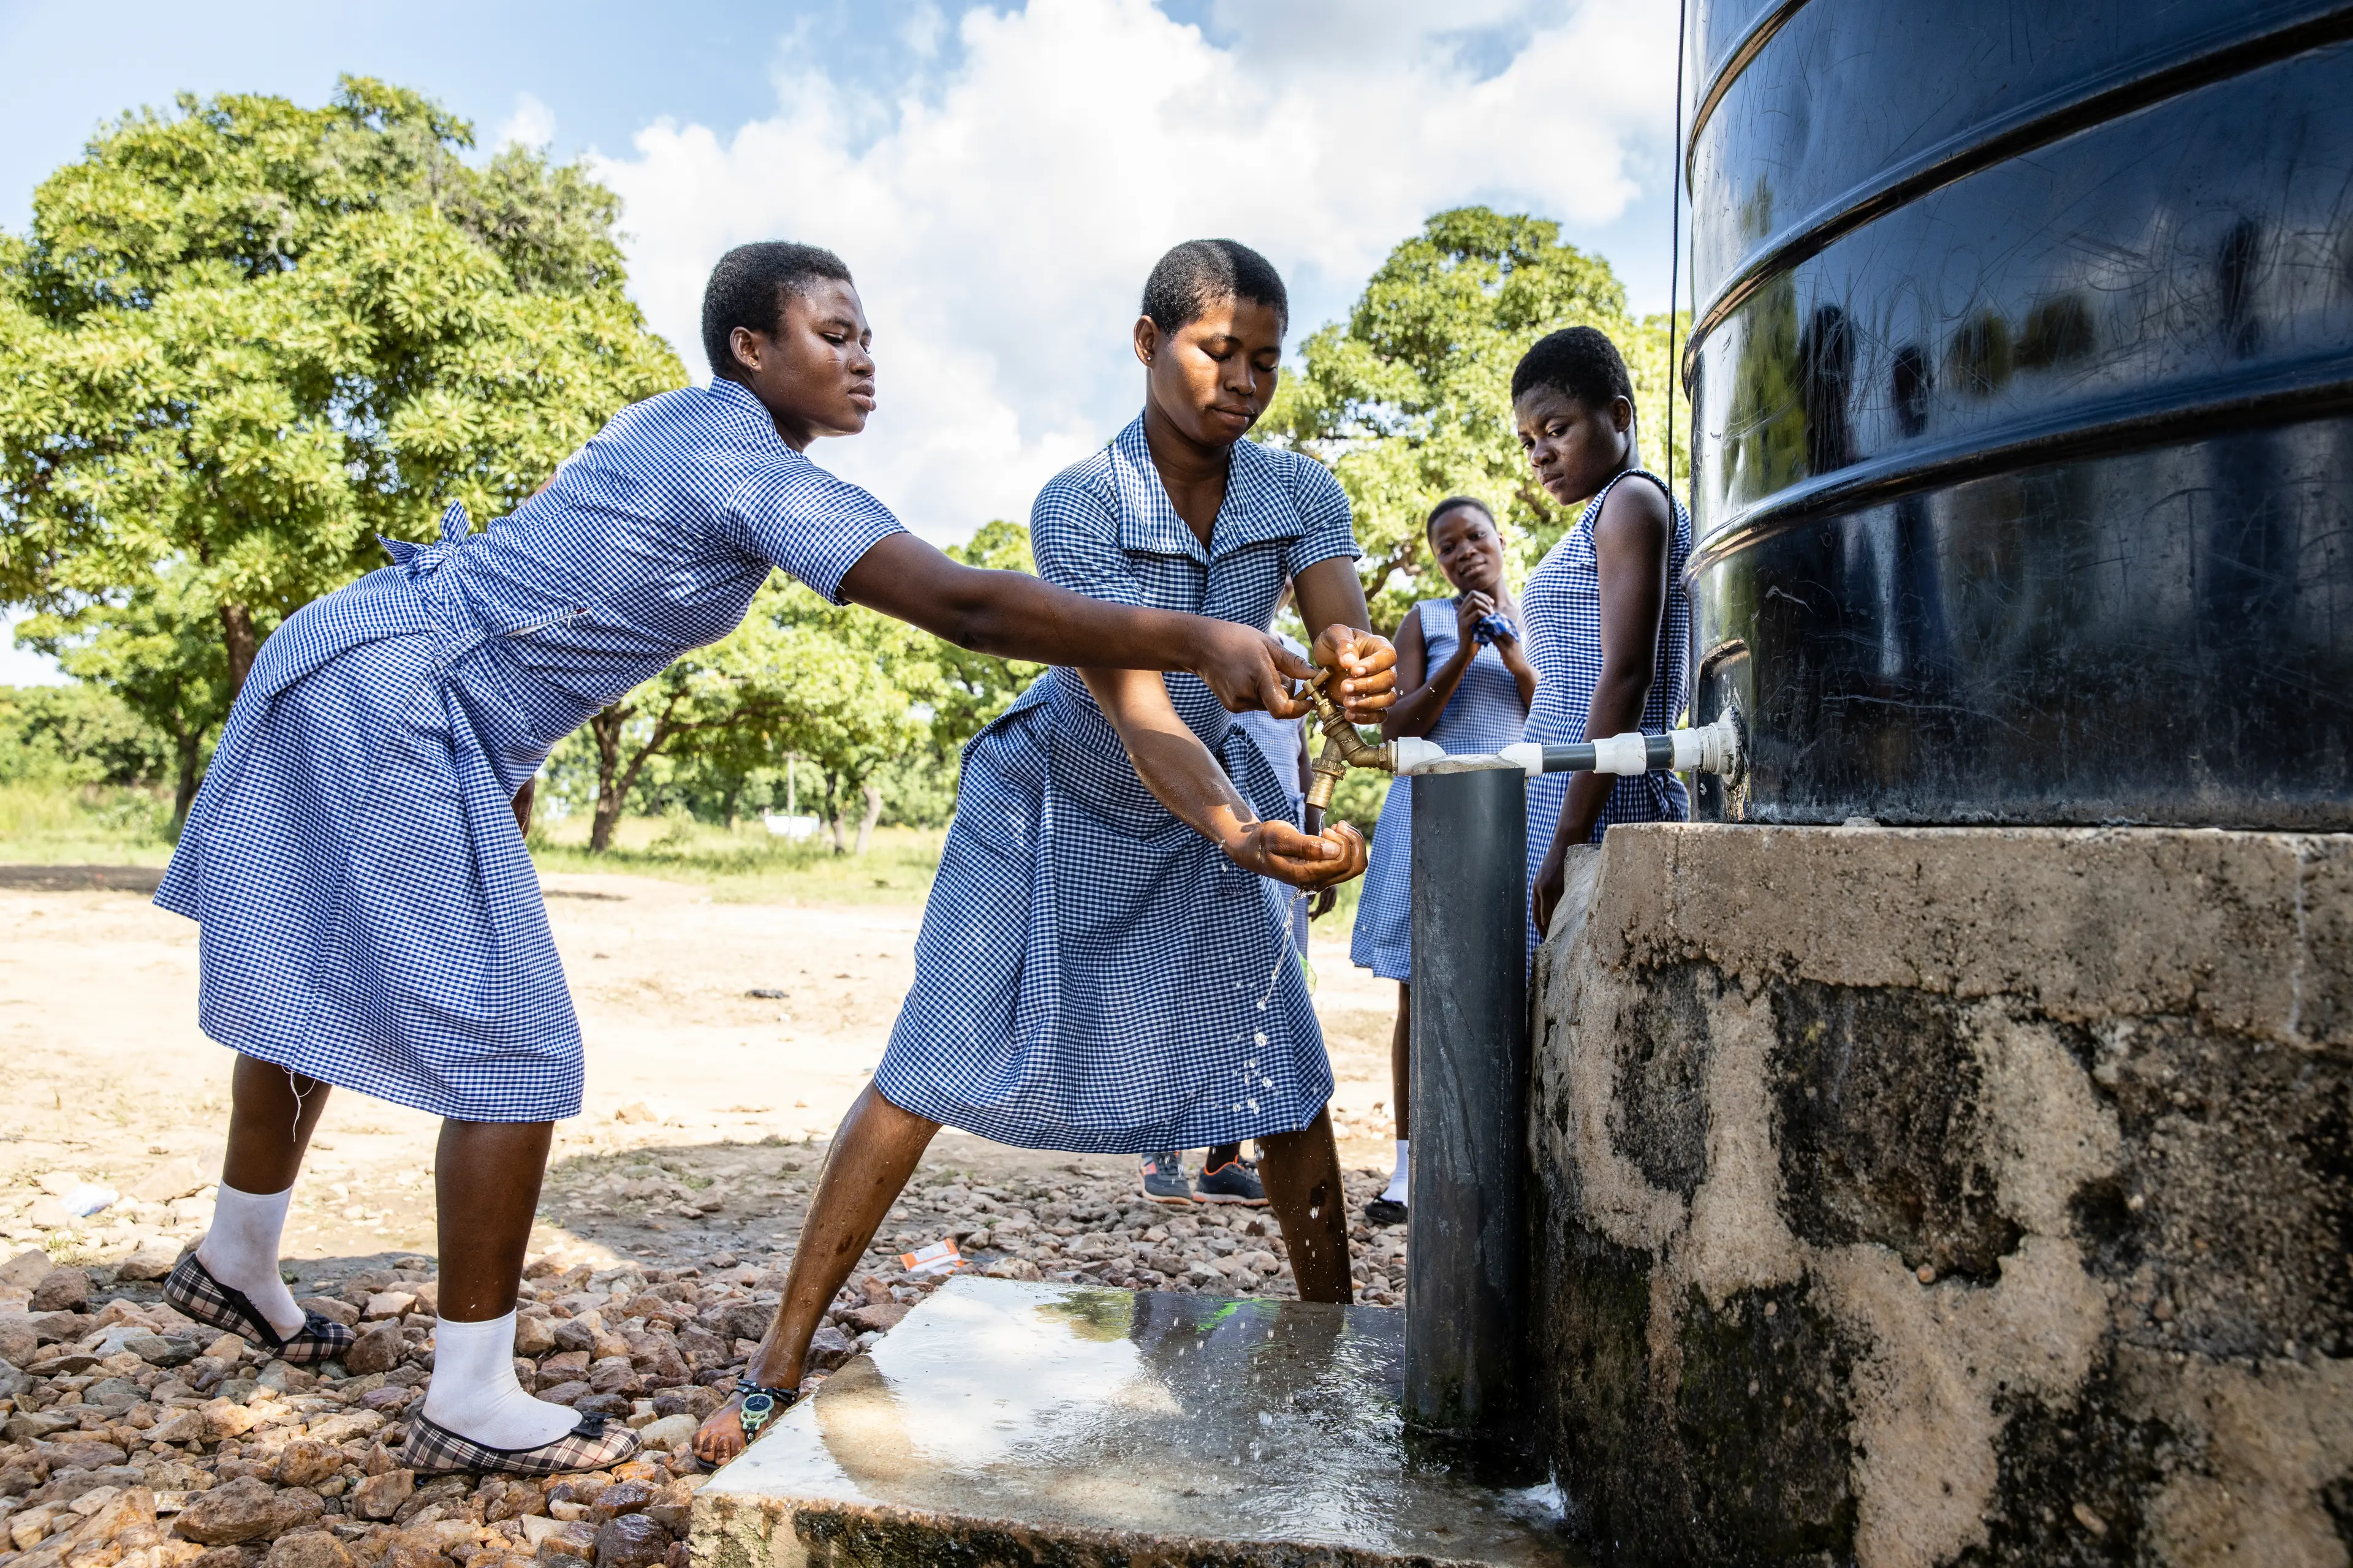 Schoolgirls washing their hands in front of a water tank. They all wear a school uniform.